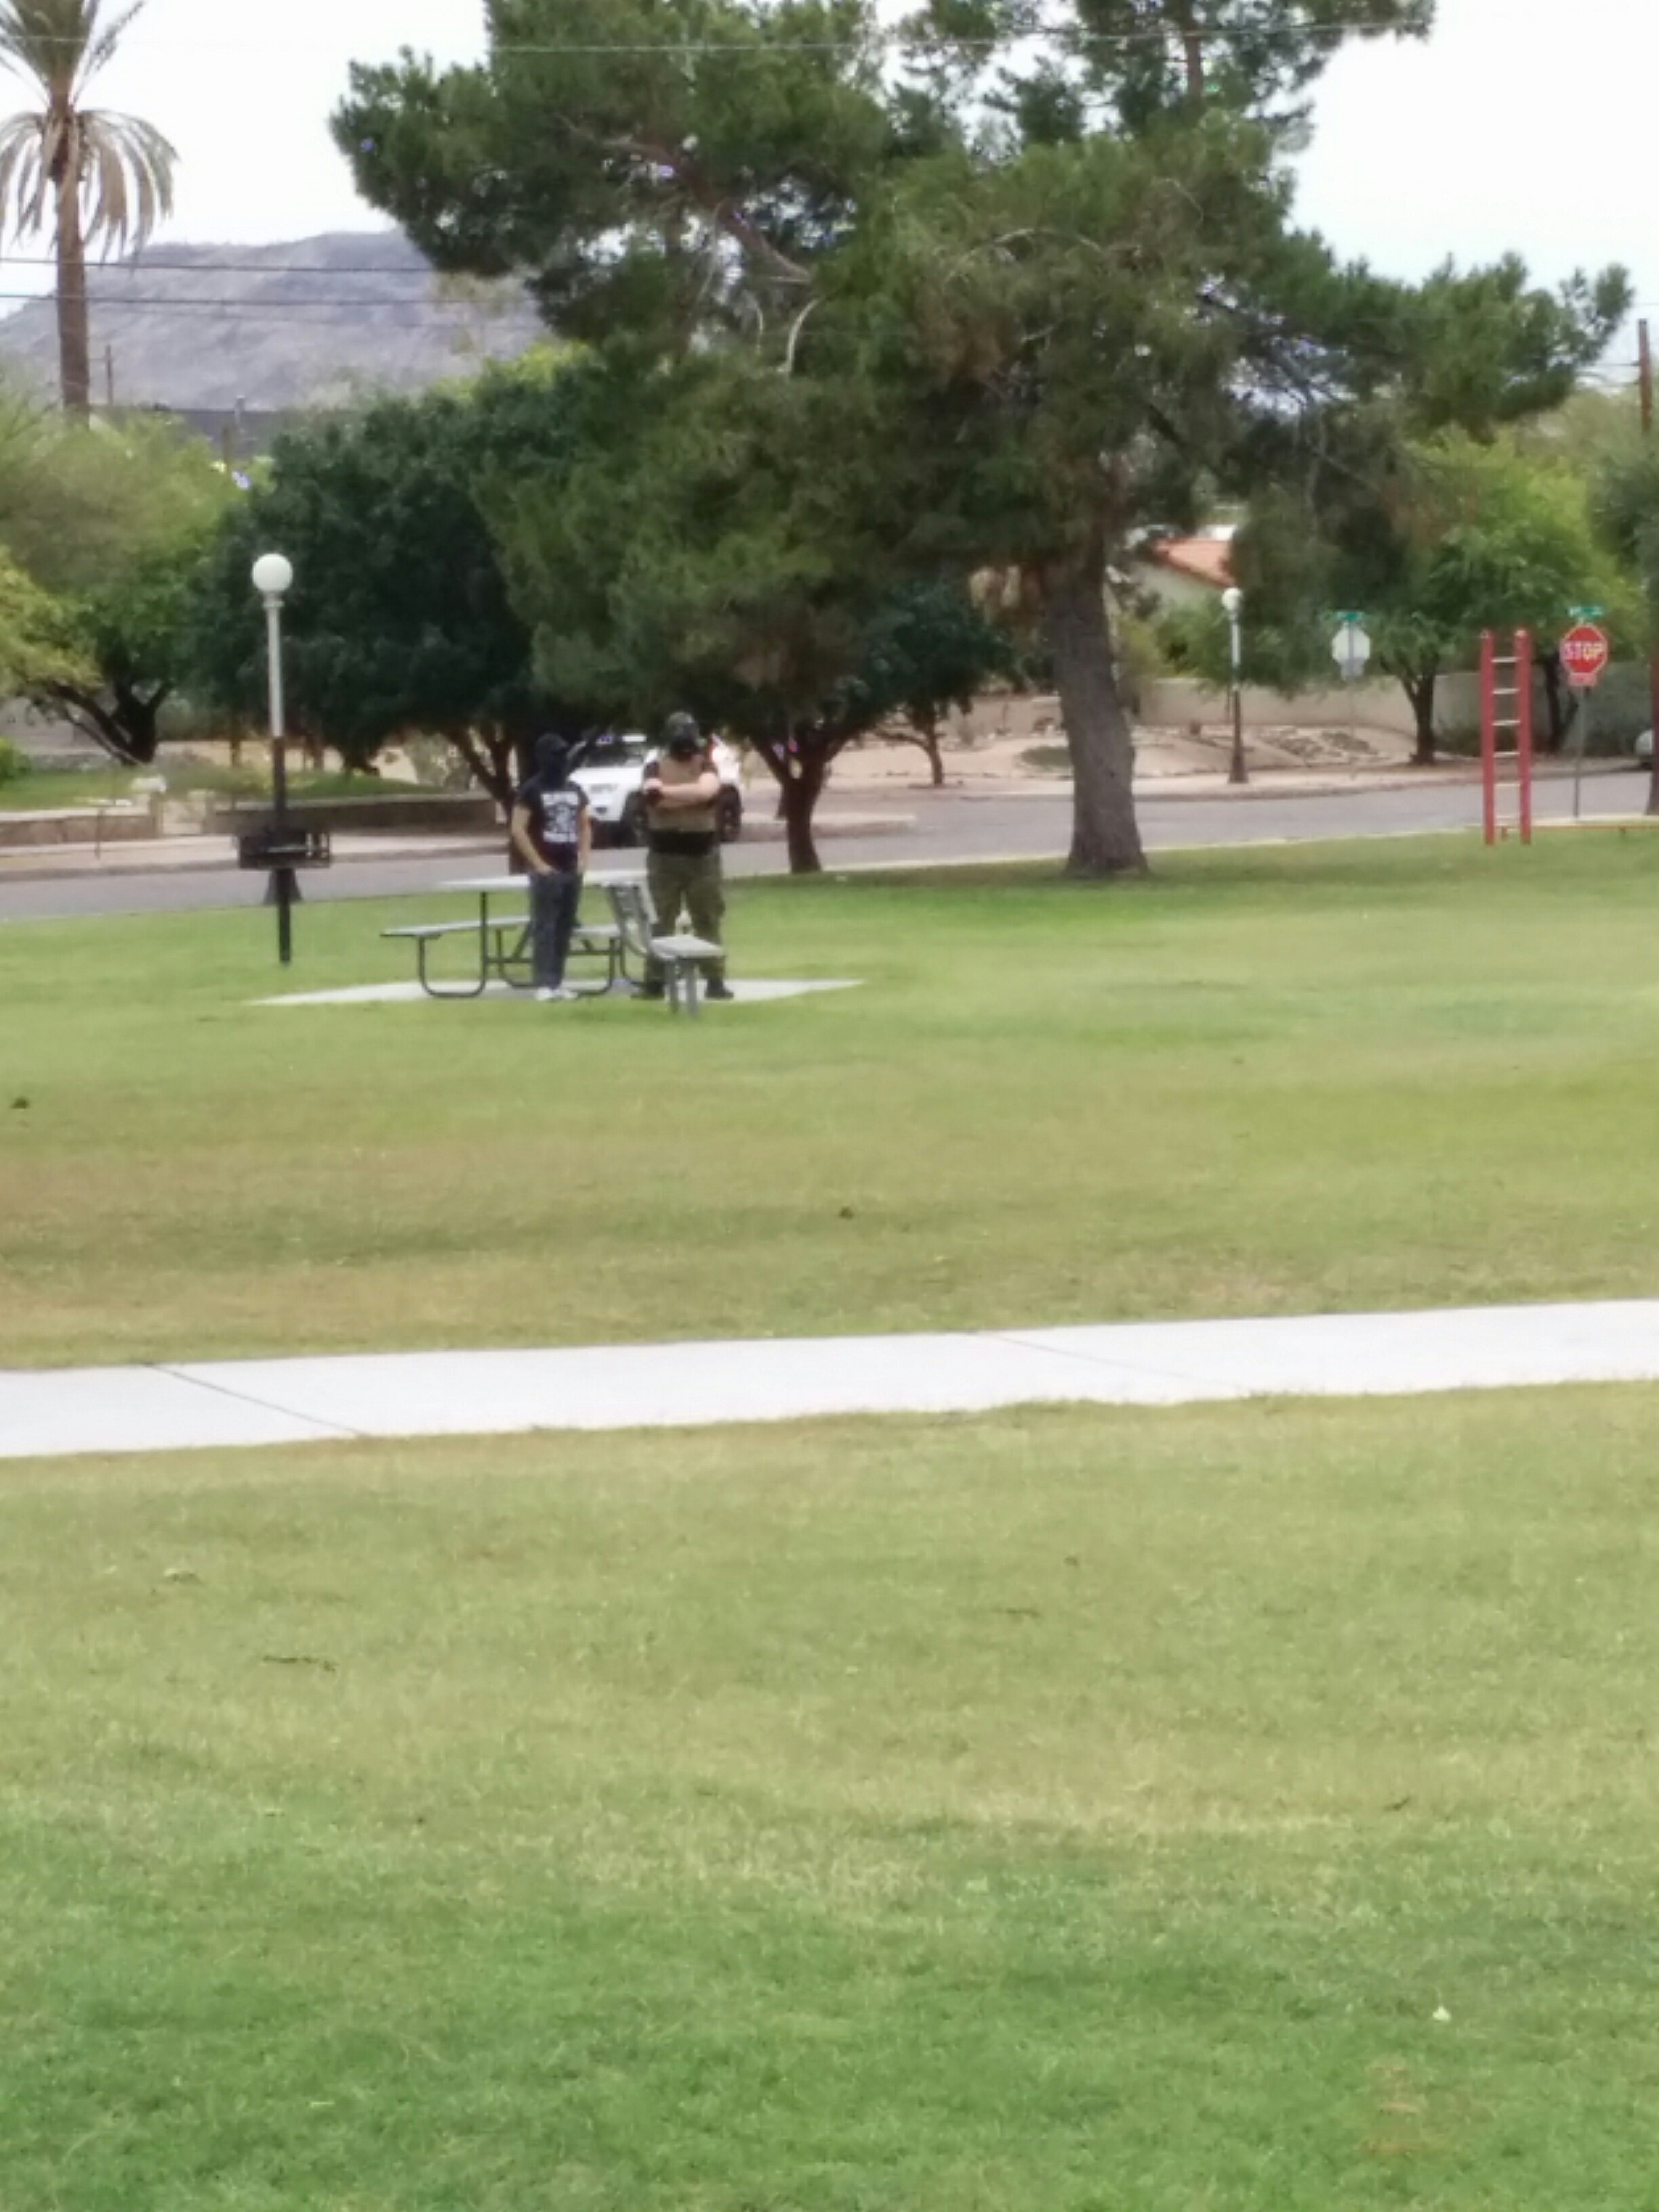 Two Nazis in Catalina park from a distance.  One wears camo pants, a flak jacket and a gask mask.  The other wears grey pants, a White supremacist t-shirt and sunglasses.